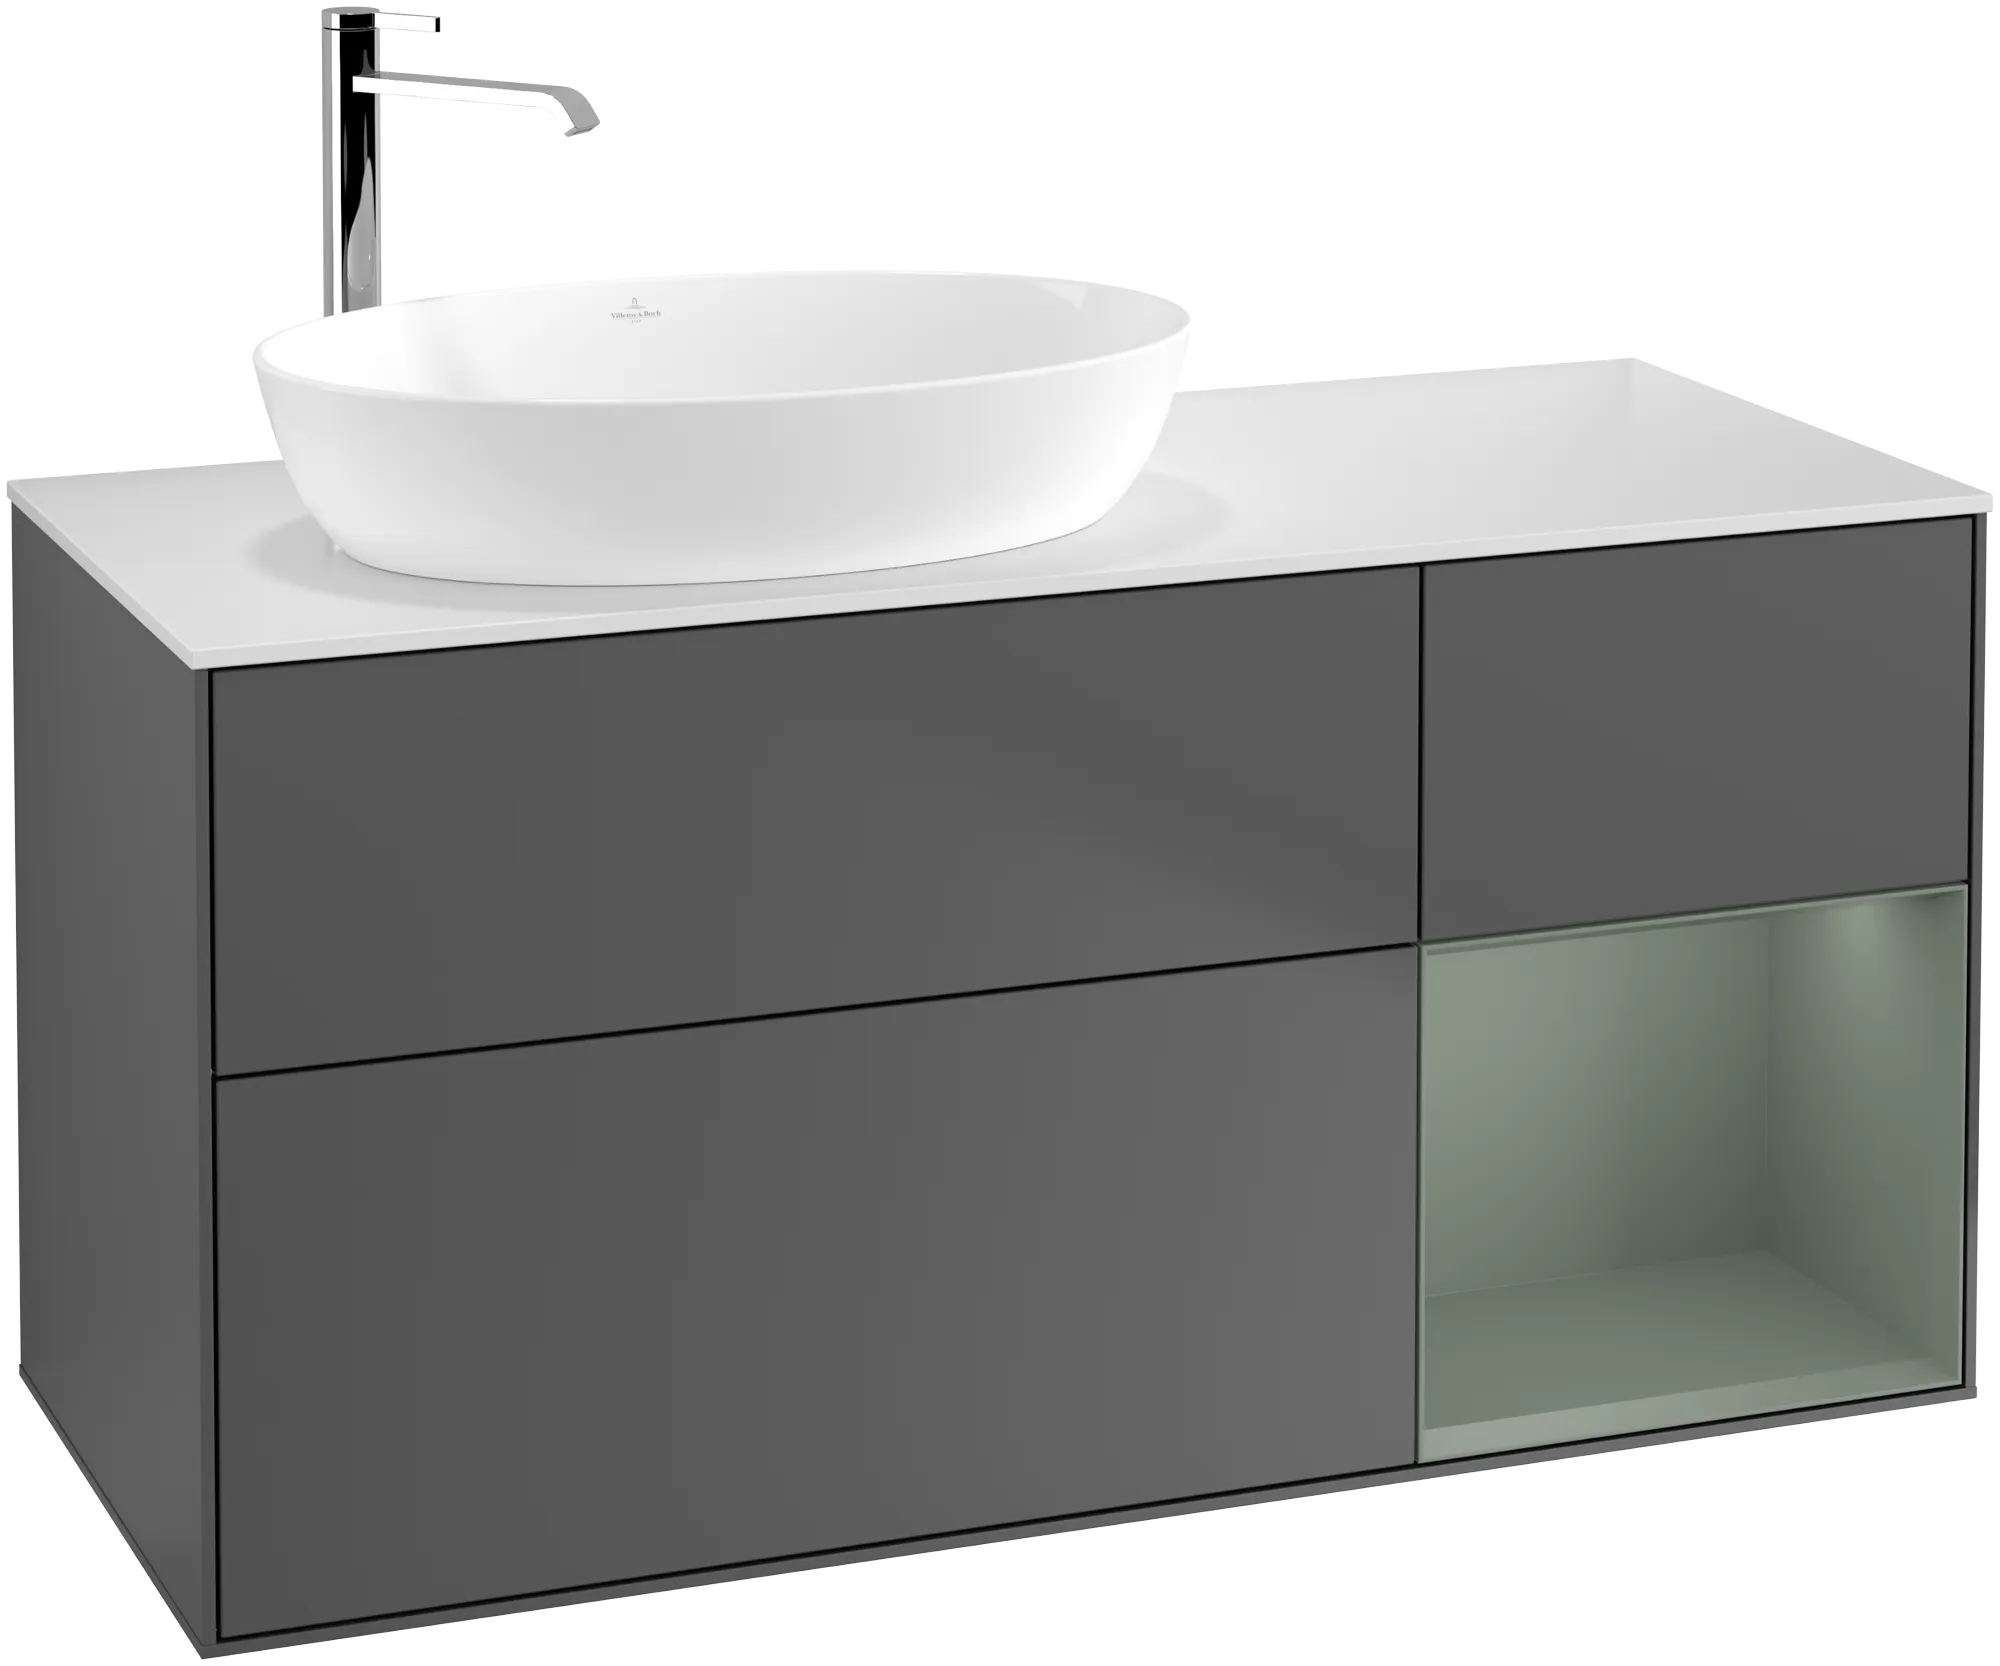 Зображення з  VILLEROY BOCH Finion Vanity unit, with lighting, 3 pull-out compartments, 1200 x 603 x 501 mm, Anthracite Matt Lacquer / Olive Matt Lacquer / Glass White Matt #G931GMGK